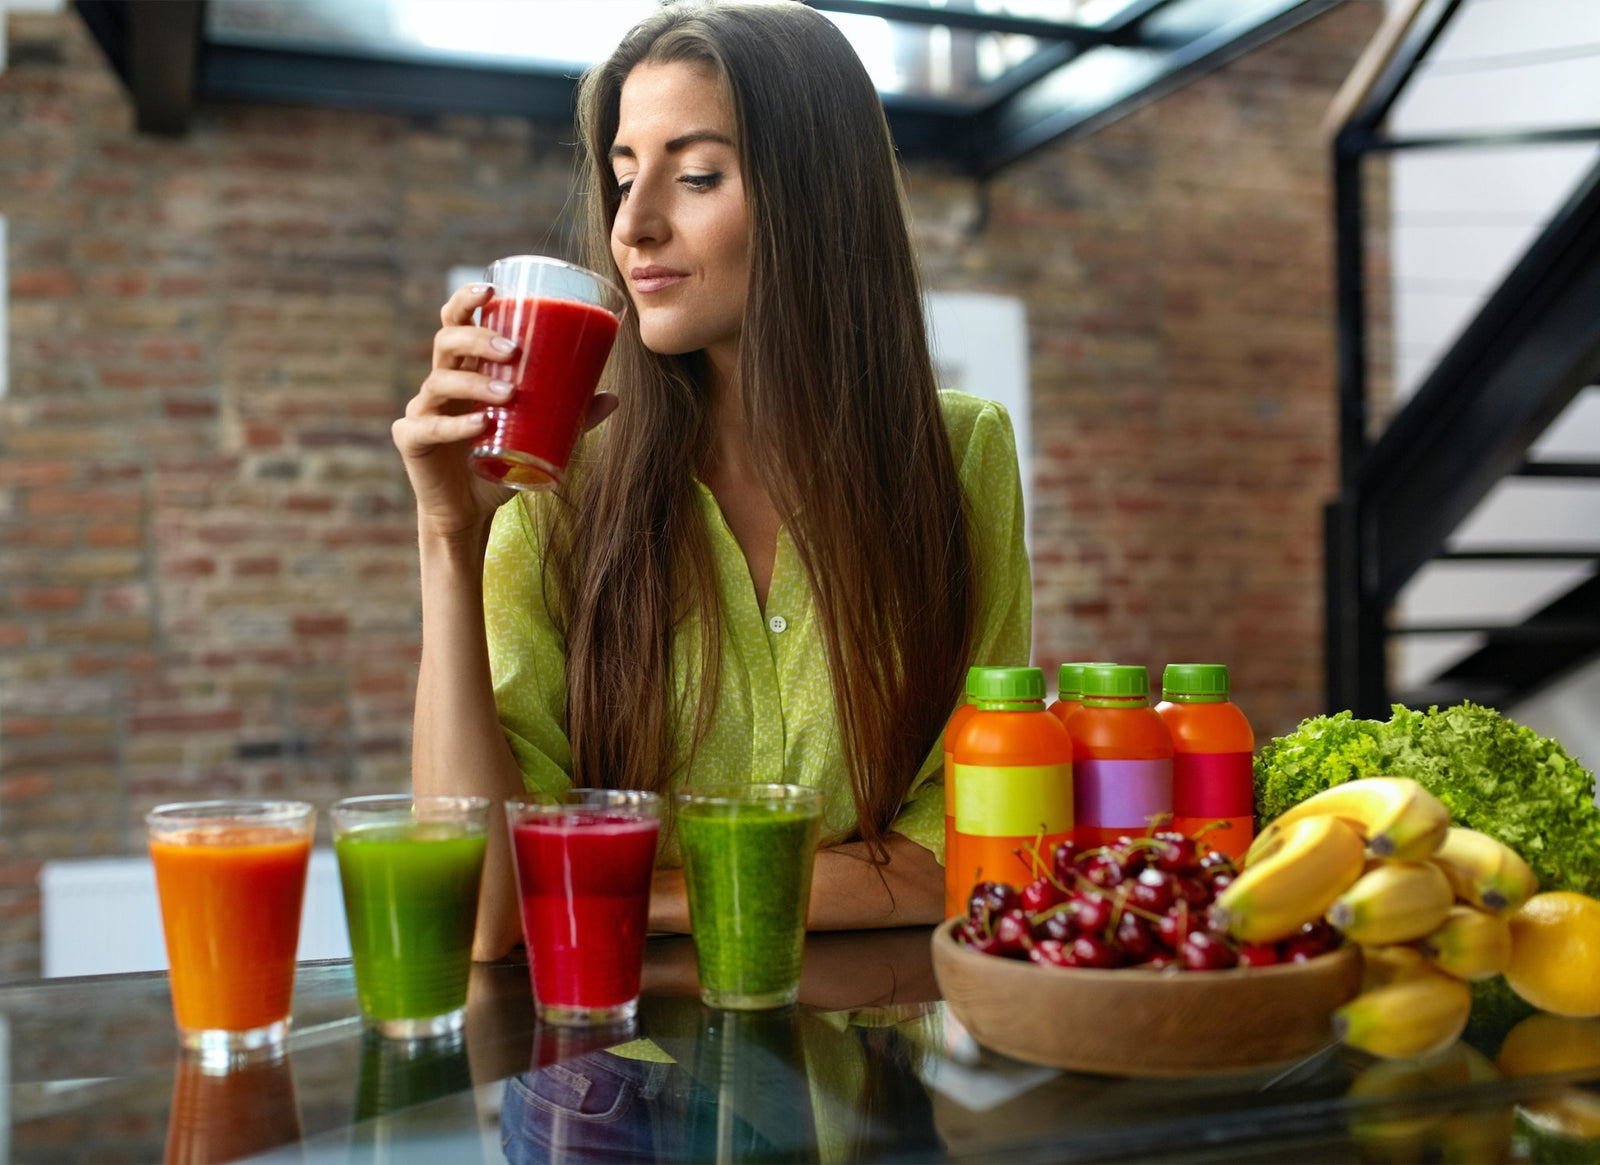 Juicing vs. Blending: Which One Is Healthier? - Max Sweets